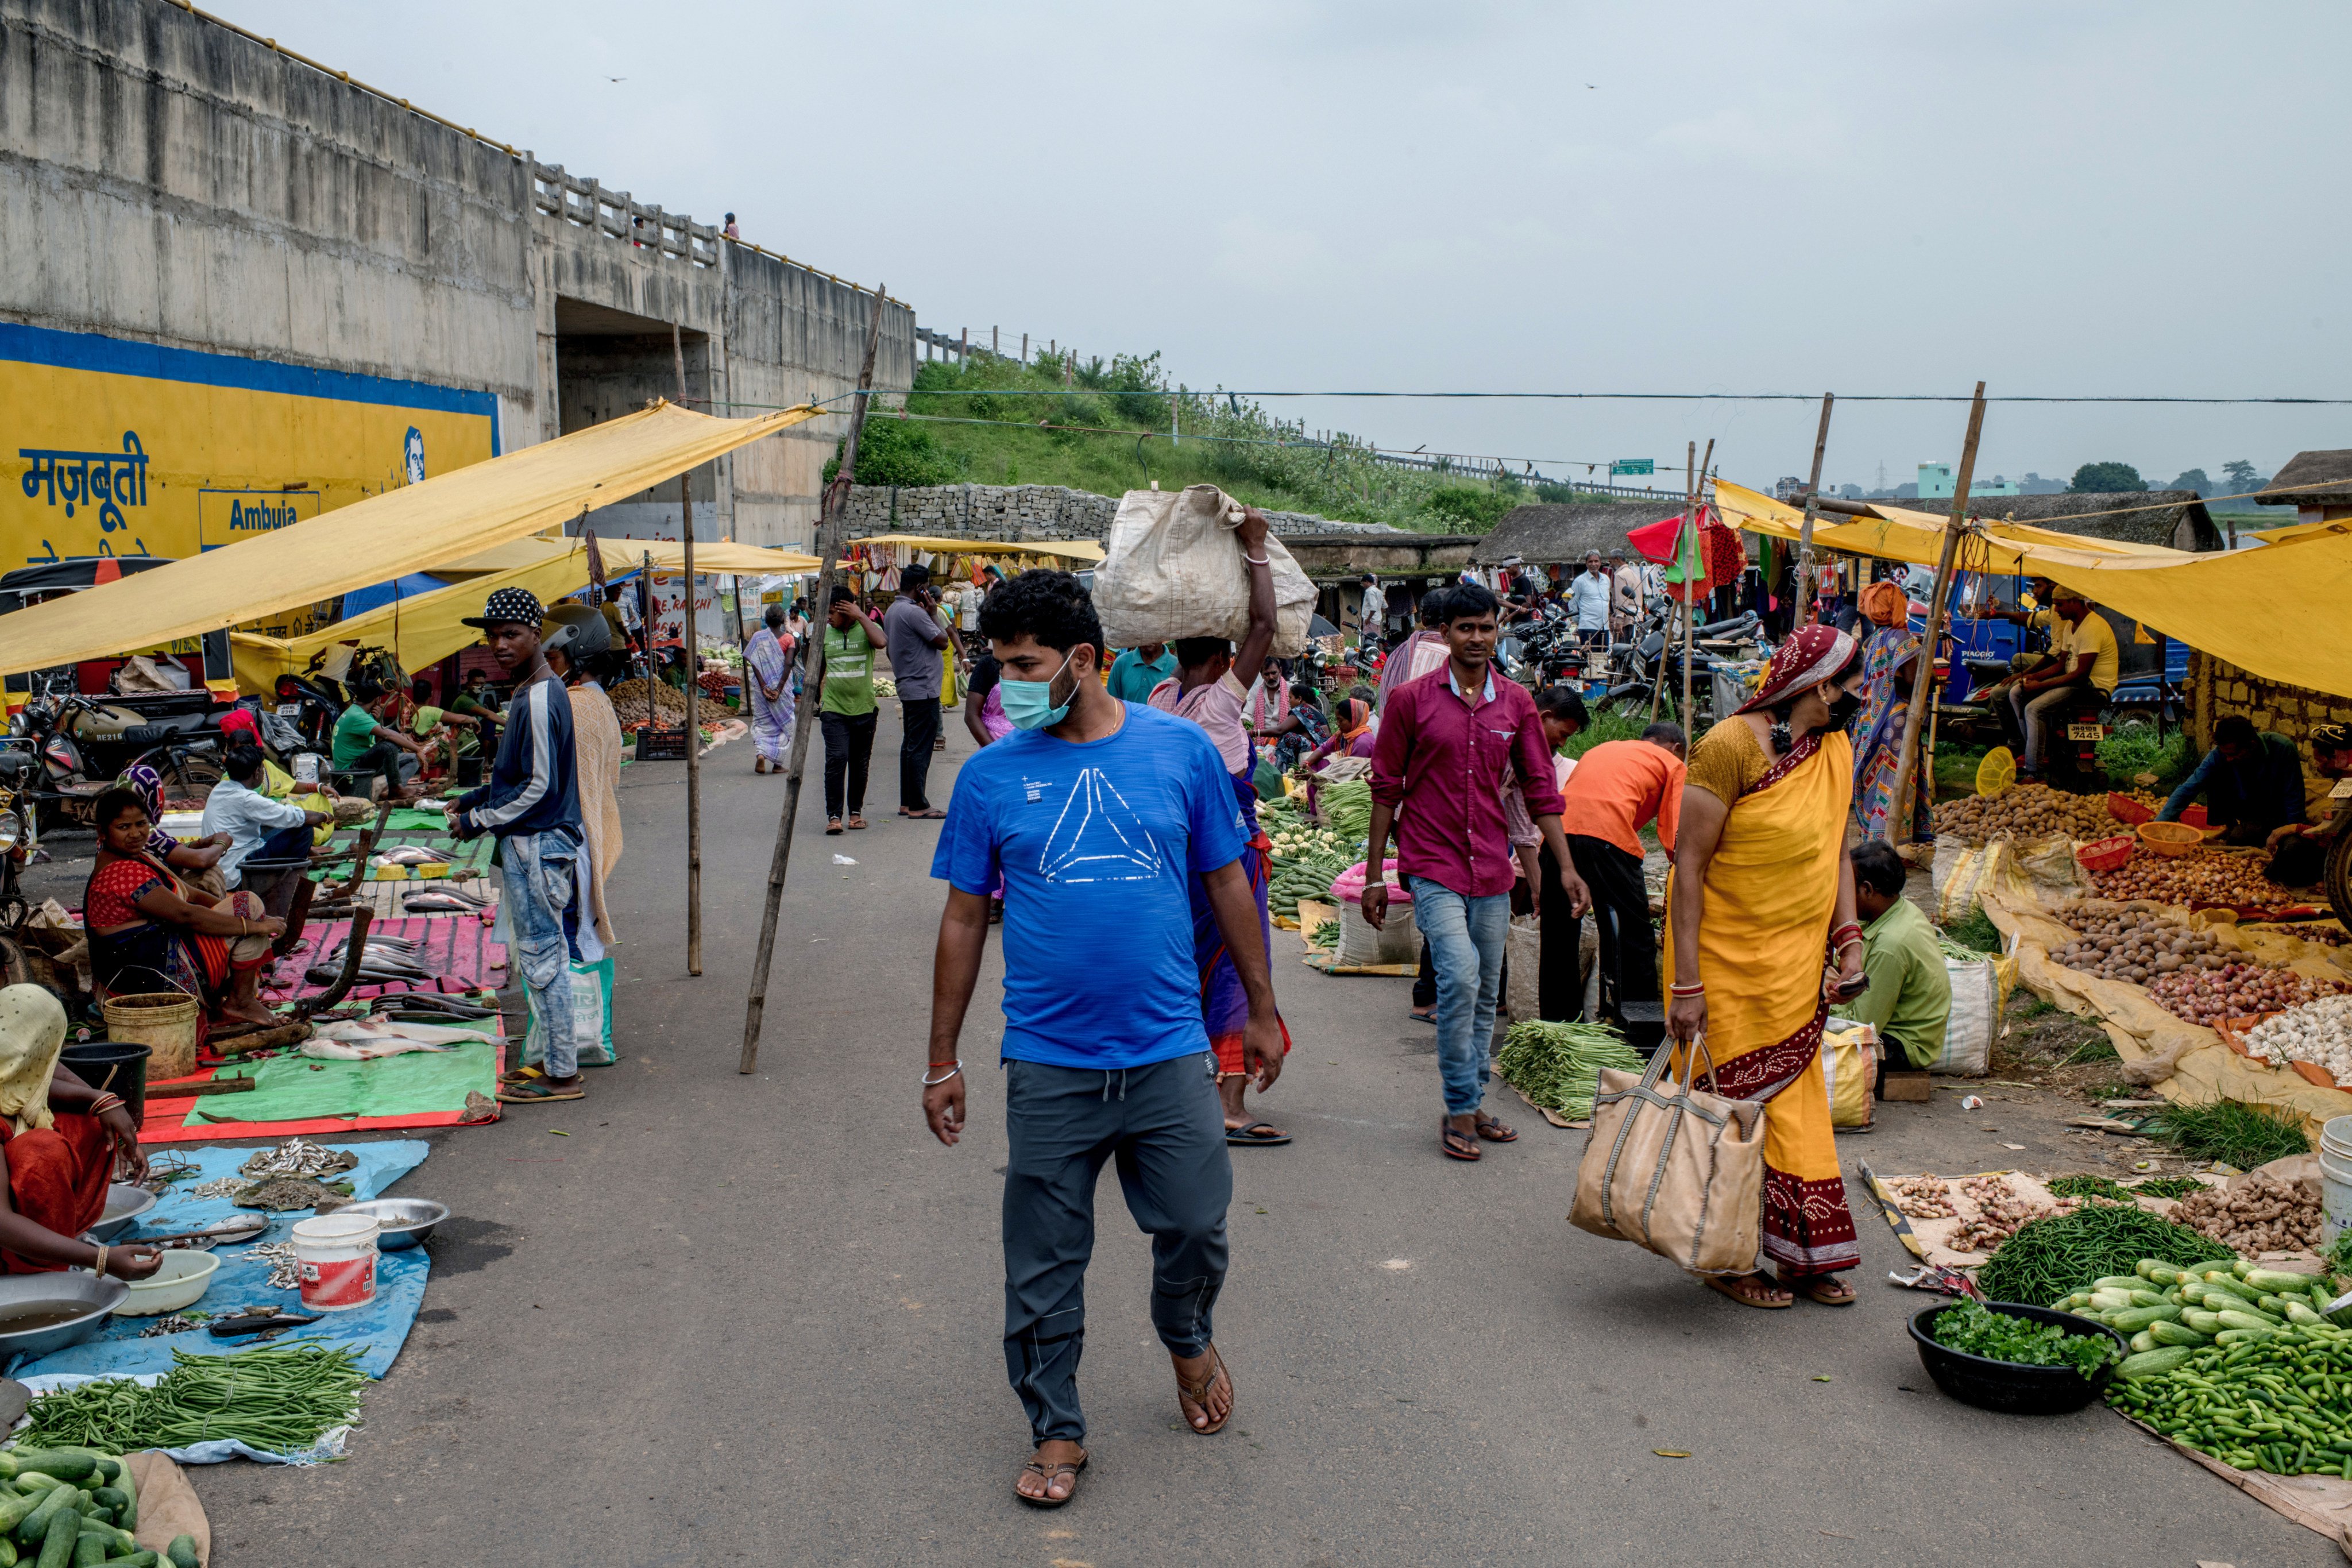 Customers shop for food at a roadside market at Nayasarai in Ranchi, India, on August 26. Developing countries across the world are facing rising food prices as inflationary pressures take hold. Photo: Bloomberg